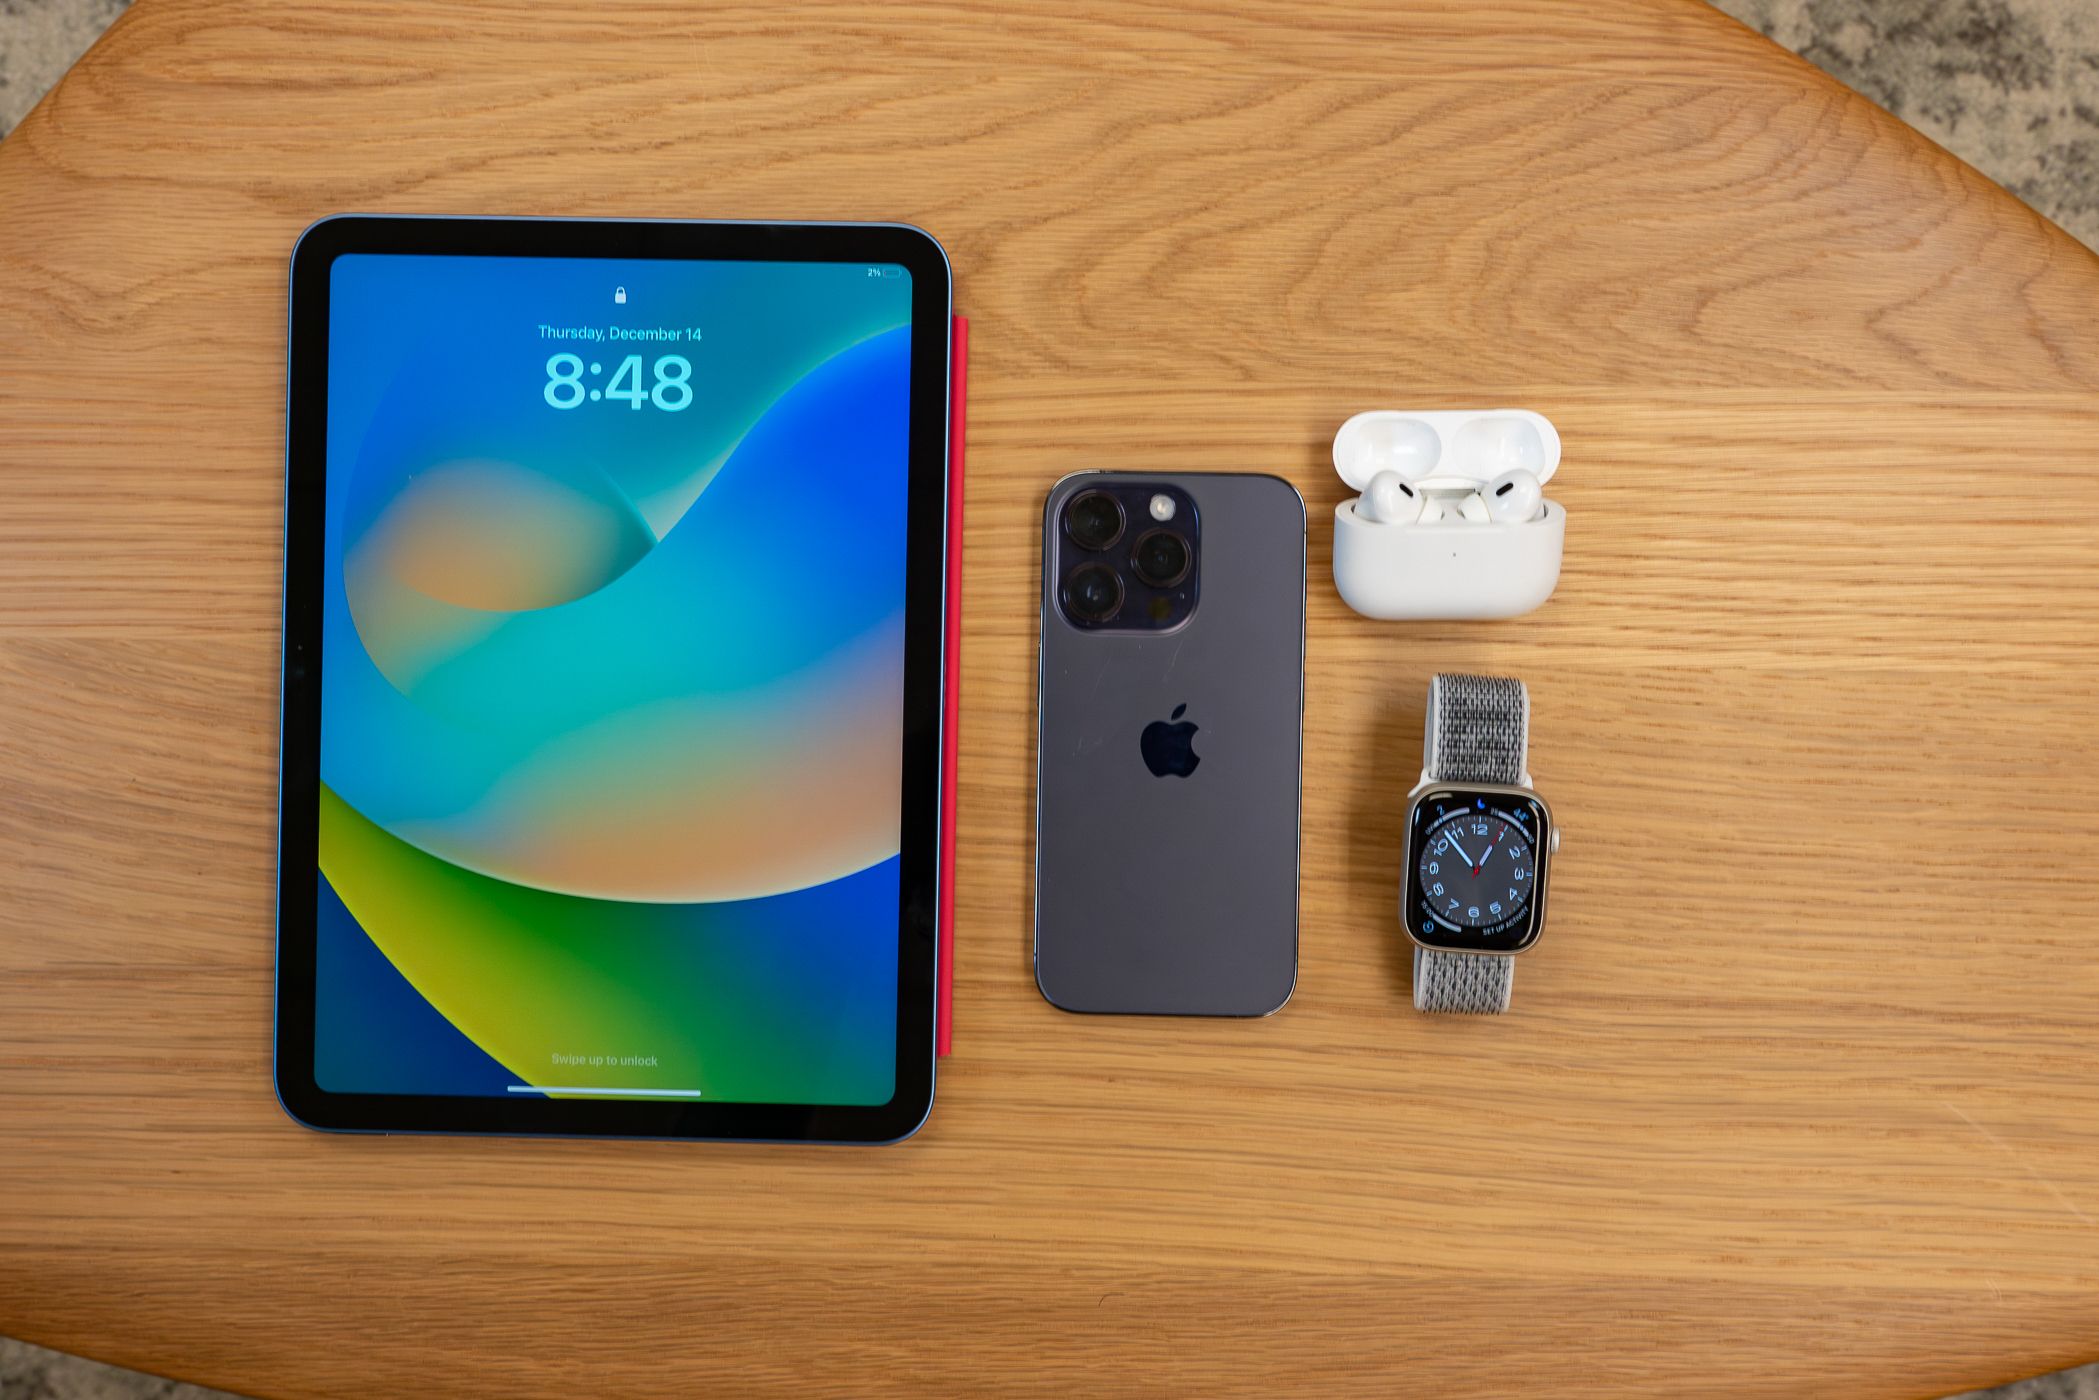 Top view of the Macbook Pro, iPhone 14, Apple watch and Airpods